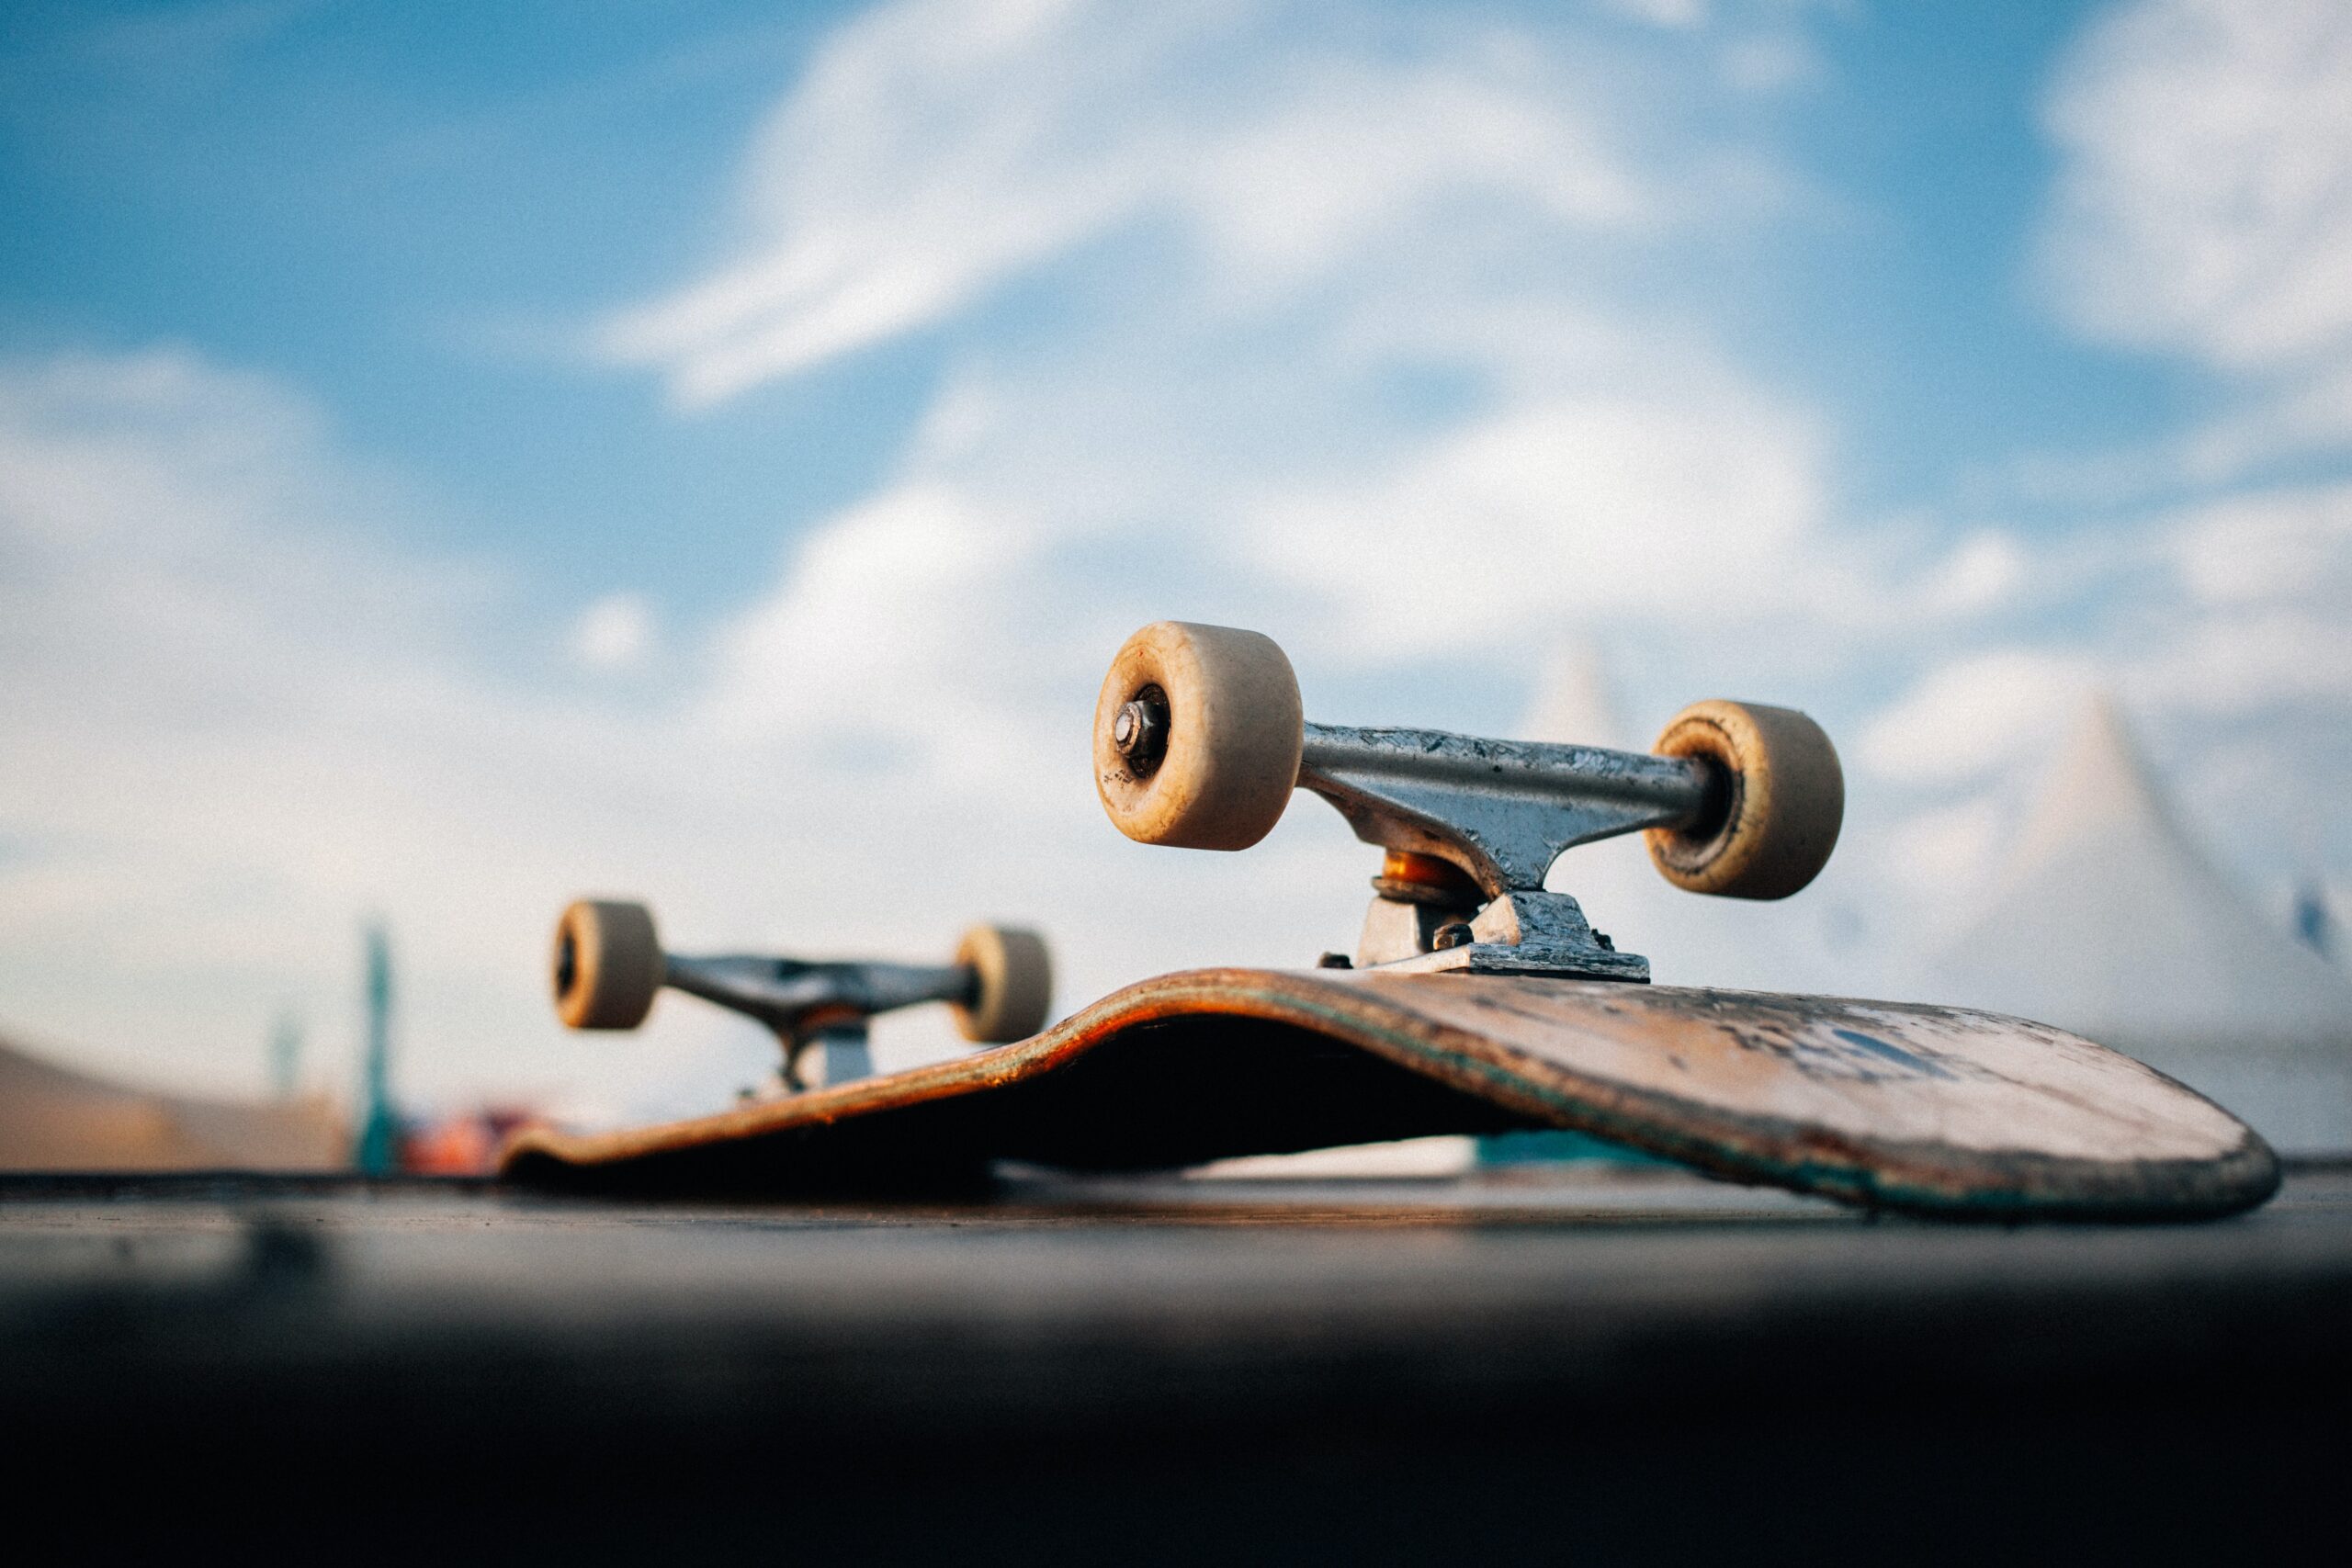 Skateboard with an outdoor view